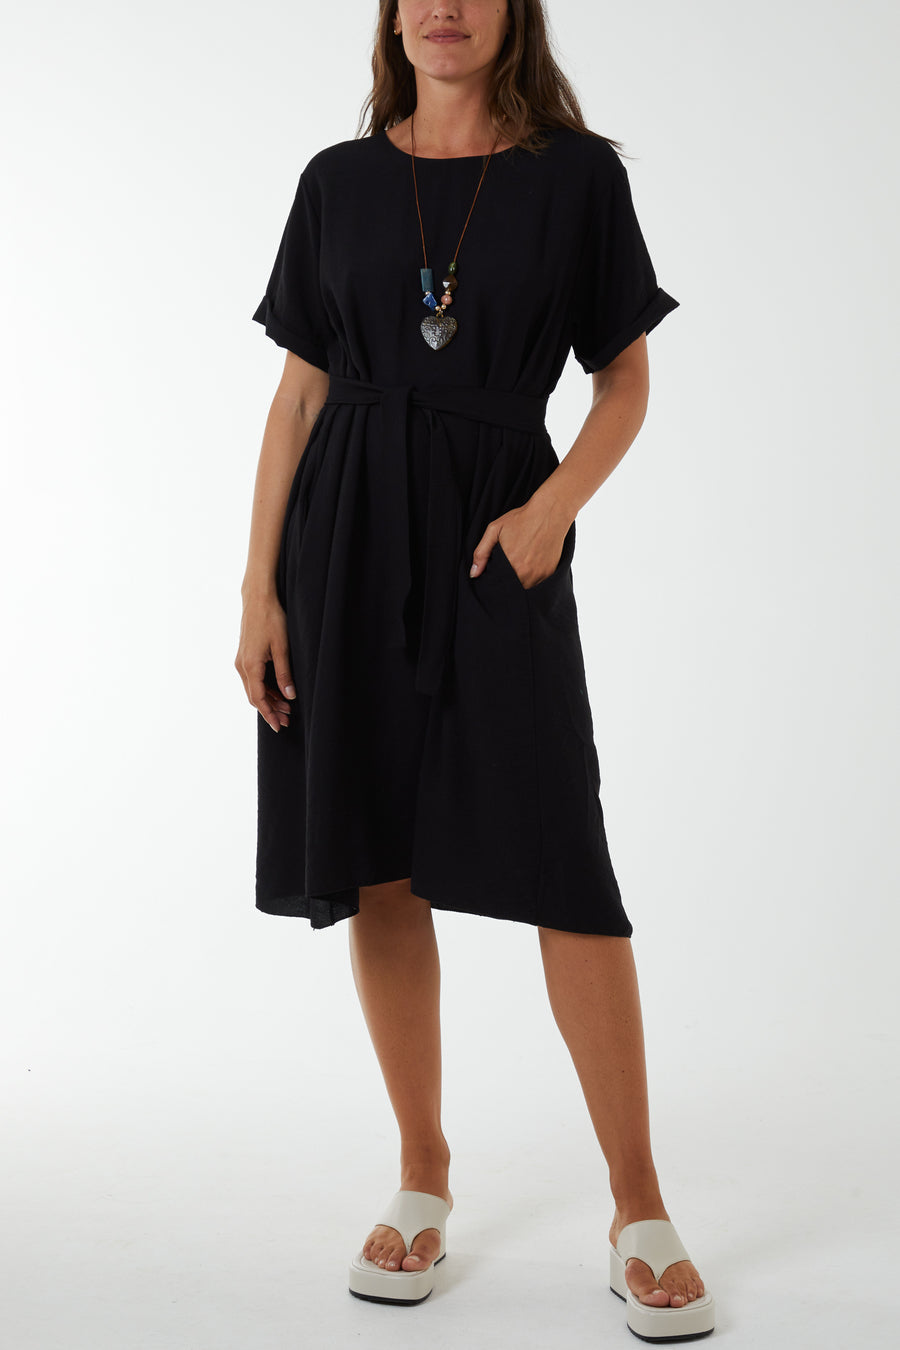 Black Belted Dress with Necklace